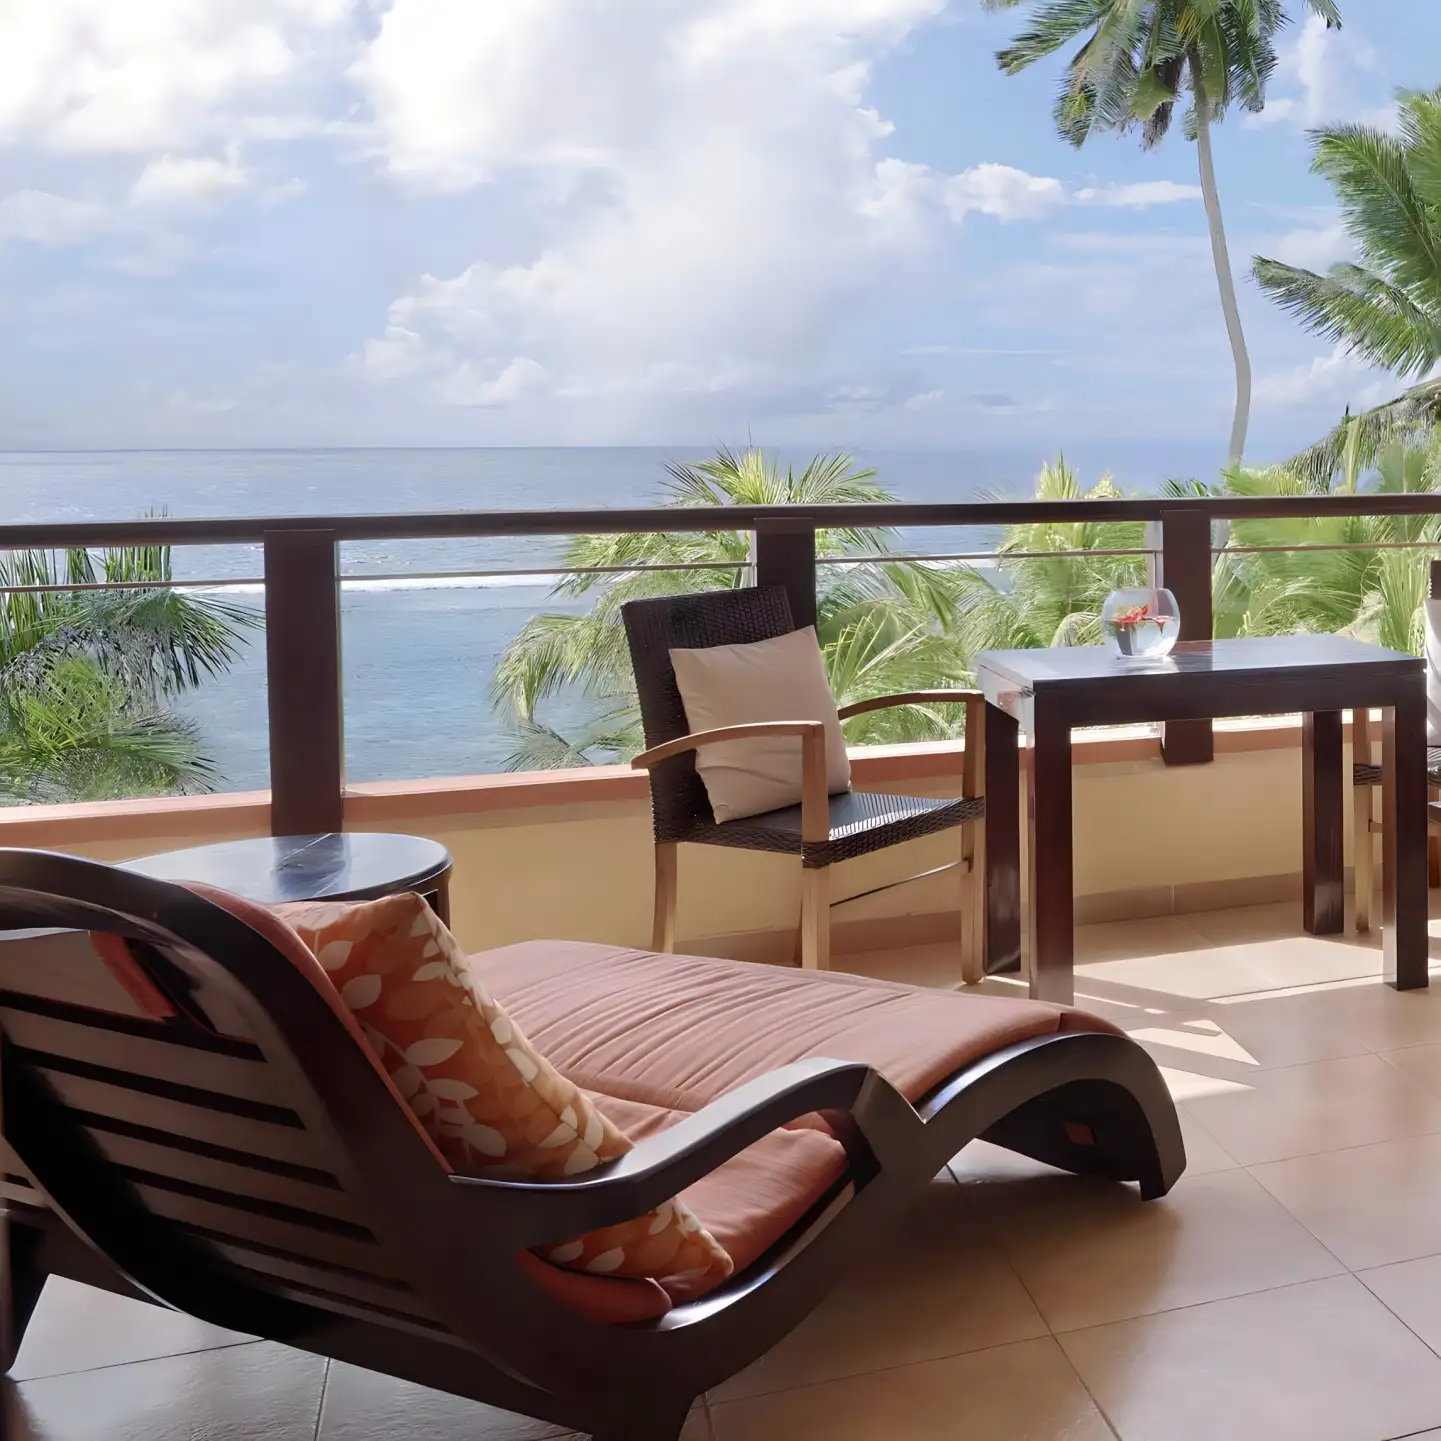 Ideally situated in the picturesque Anse Forbans, the modern four-star DoubleTree Resort & Spa by Hilton Hotel Seychelles - Allamanda offers a romantic and superb private beach surrounded by untouched lush tropical foliage.